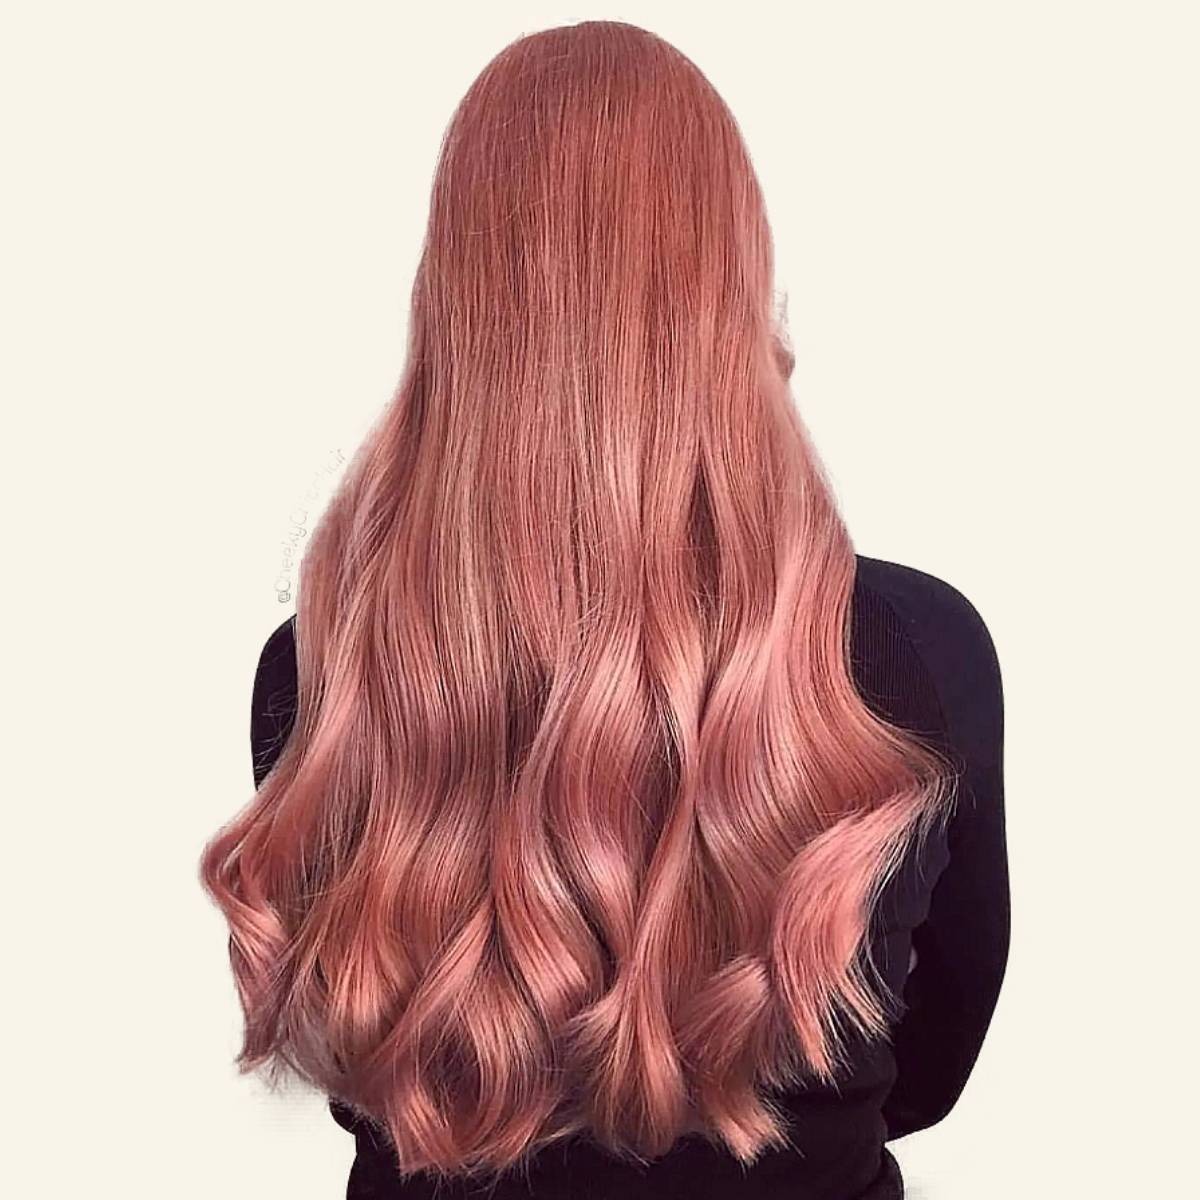 Dusty Rose Hair Trend: 20 Ways to Wear the Look